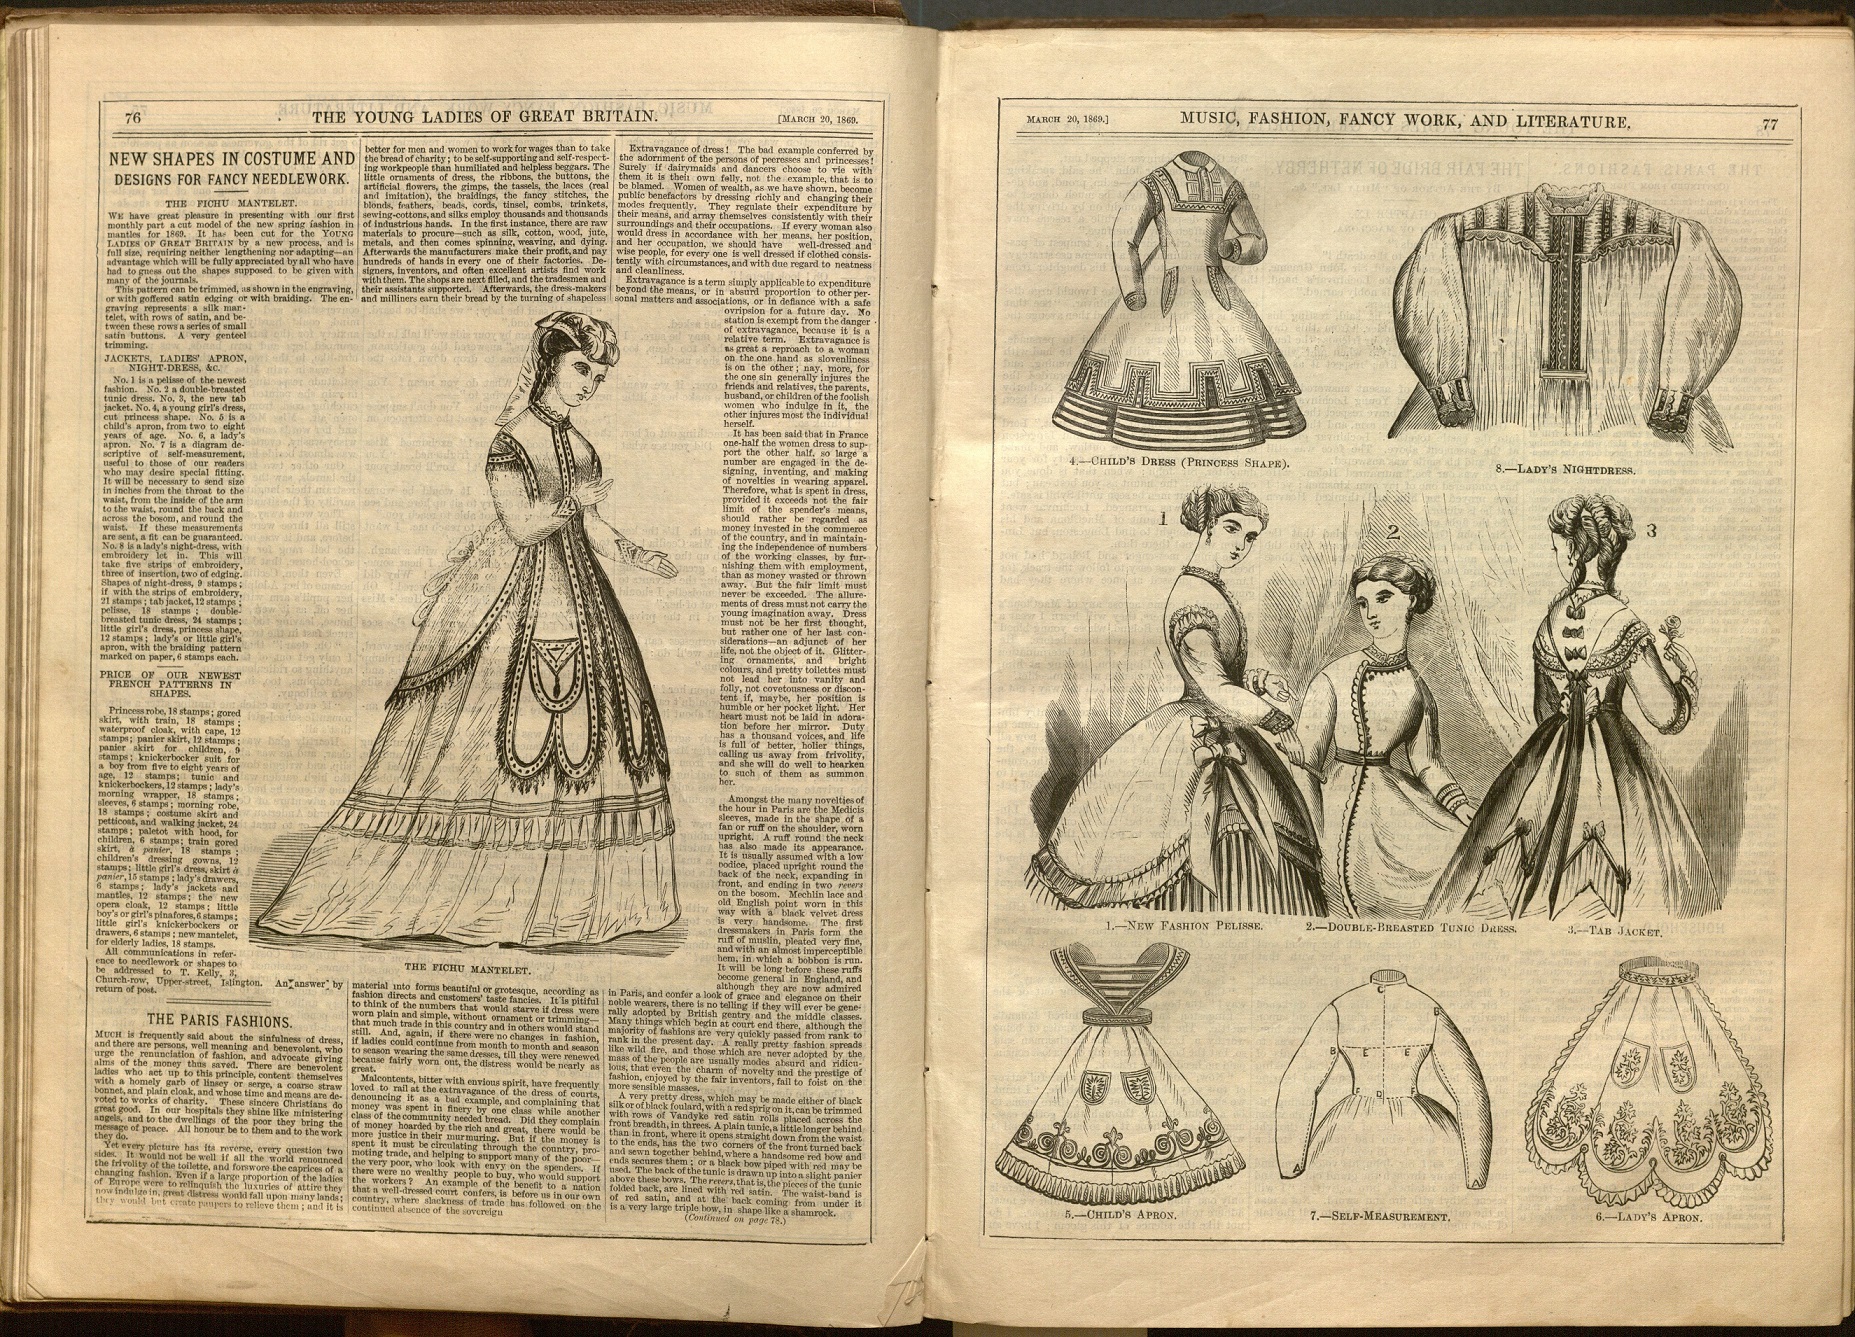 Opening from Young Ladies of Great Britain, featuring New Shapes in Costume and Designs for Fancy Needlework